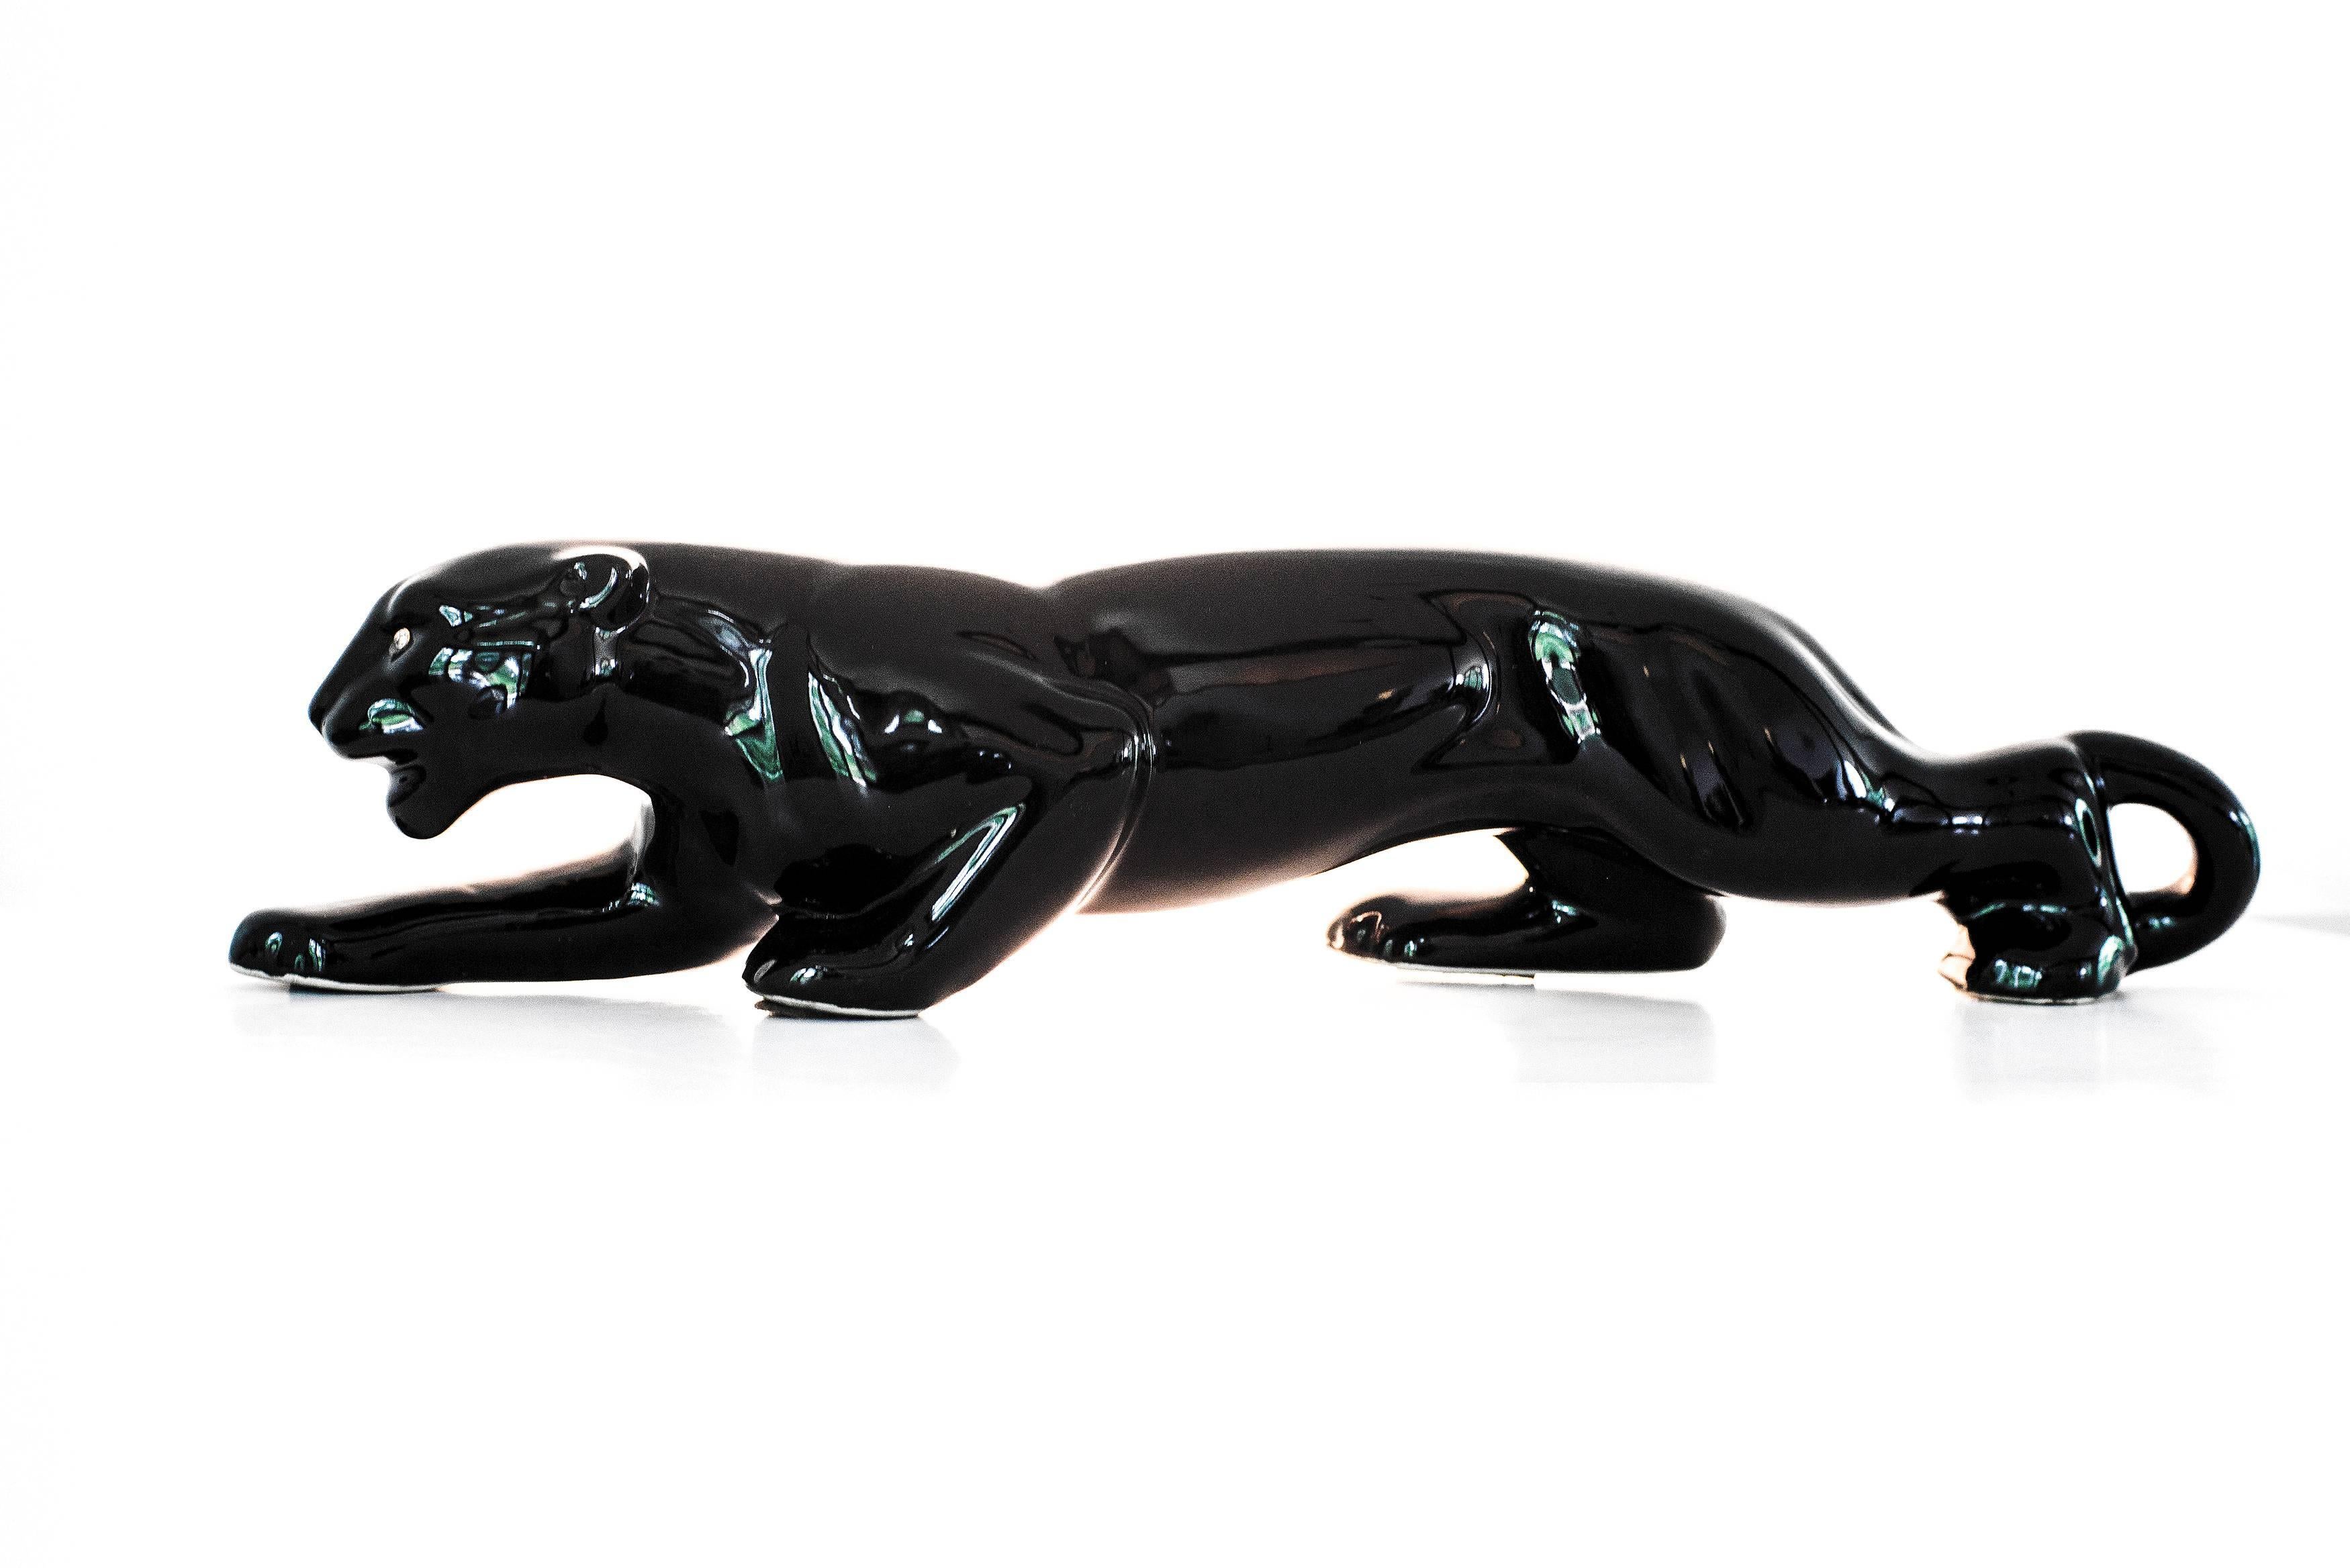 A vintage Mid-Century Modern ceramic Black Panther television figurine lamp, with rhinestone eyes. These figurine T.V. lamps were manufactured in the 1950s when American households were buying and watching T.V. en masse; the back-light of the